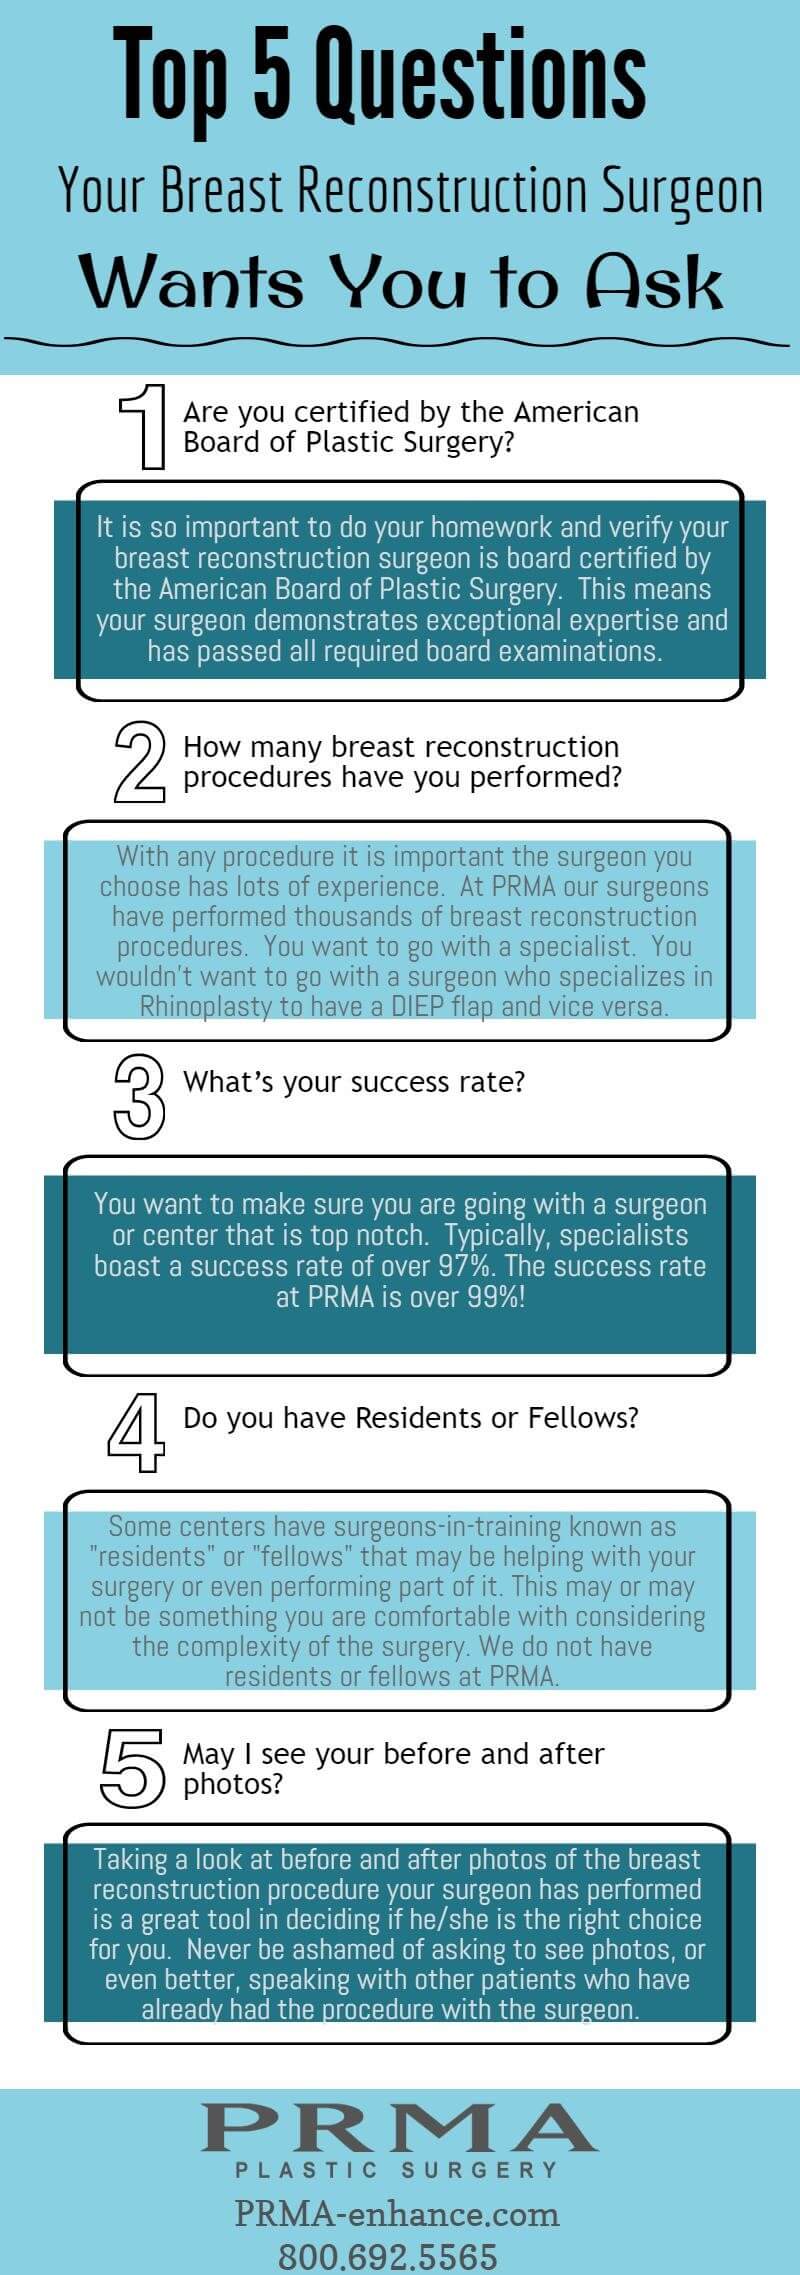 5 questions to ask your reconstruction surgeon